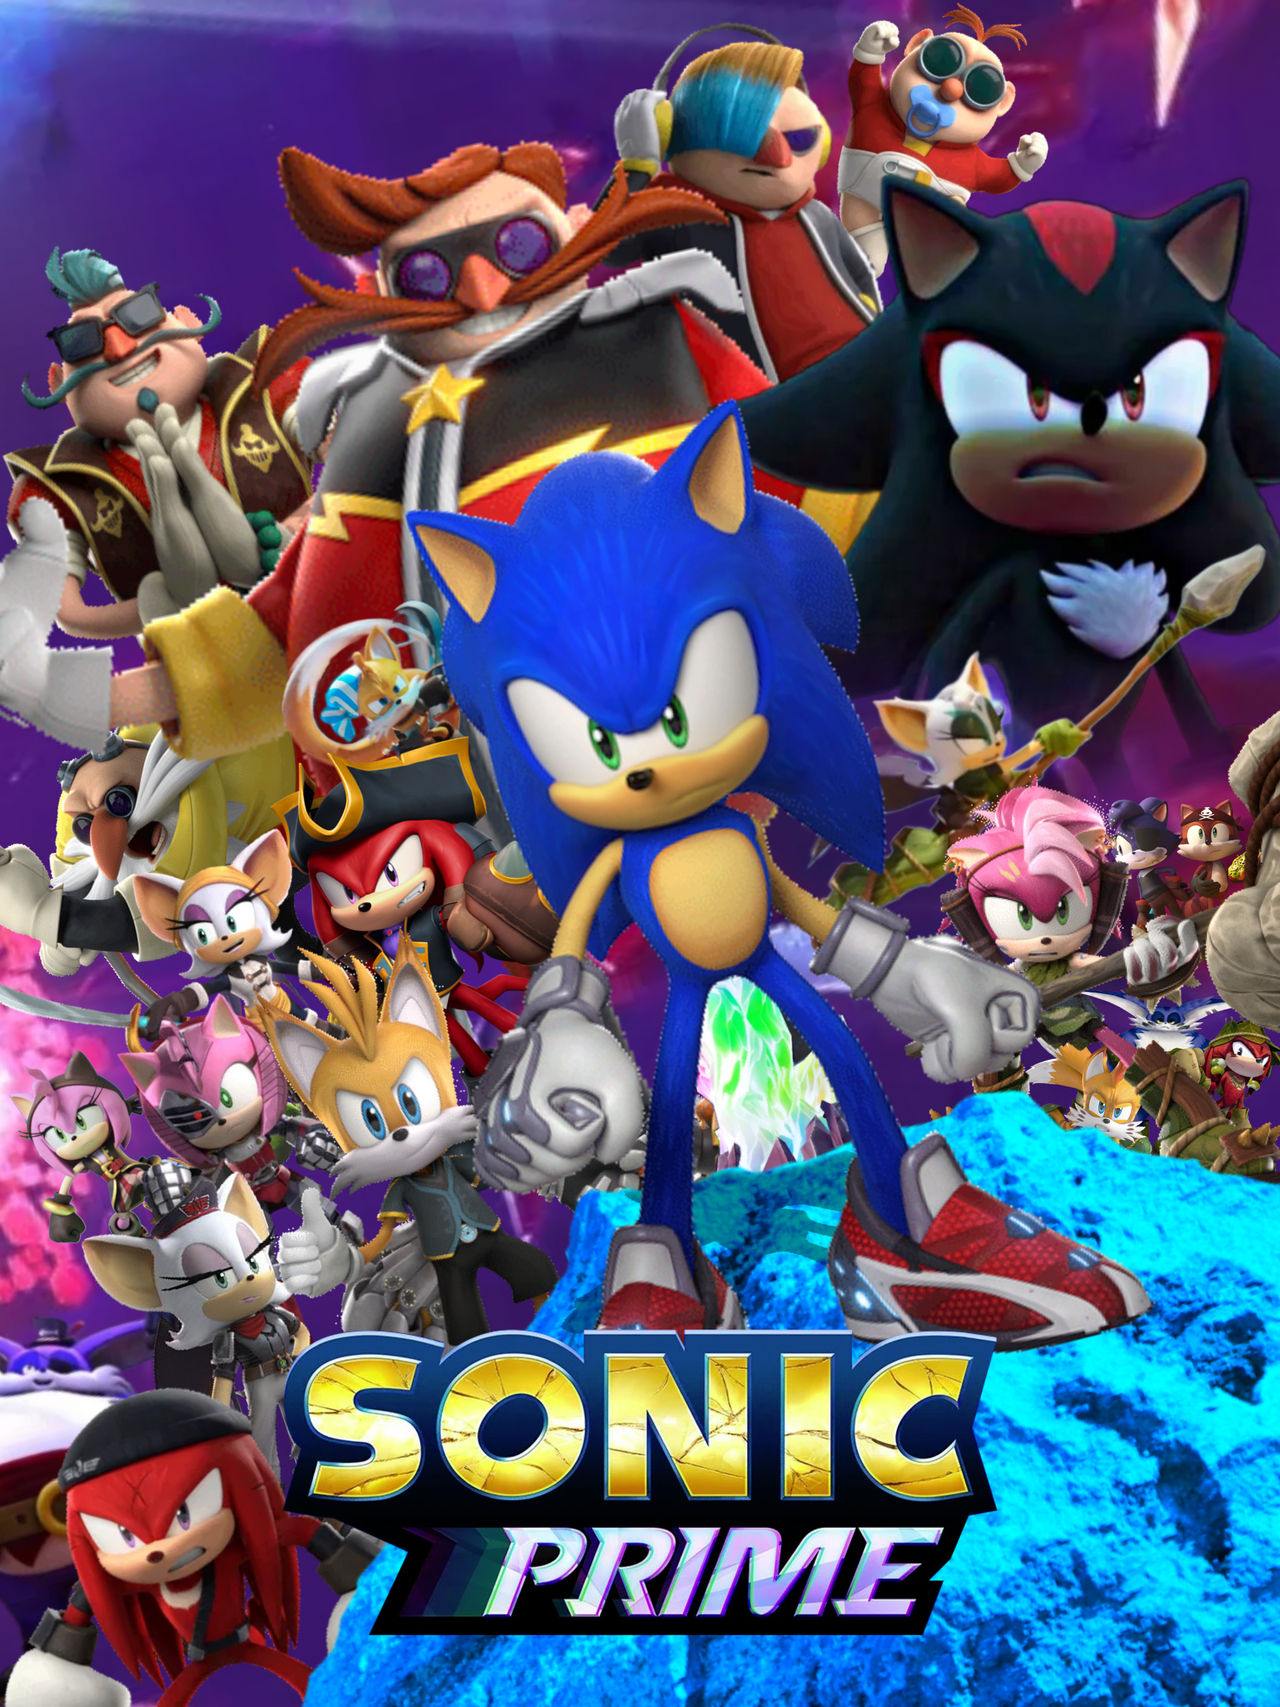 Sonic Prime Fanmade Poster 3 by Danic574 on DeviantArt